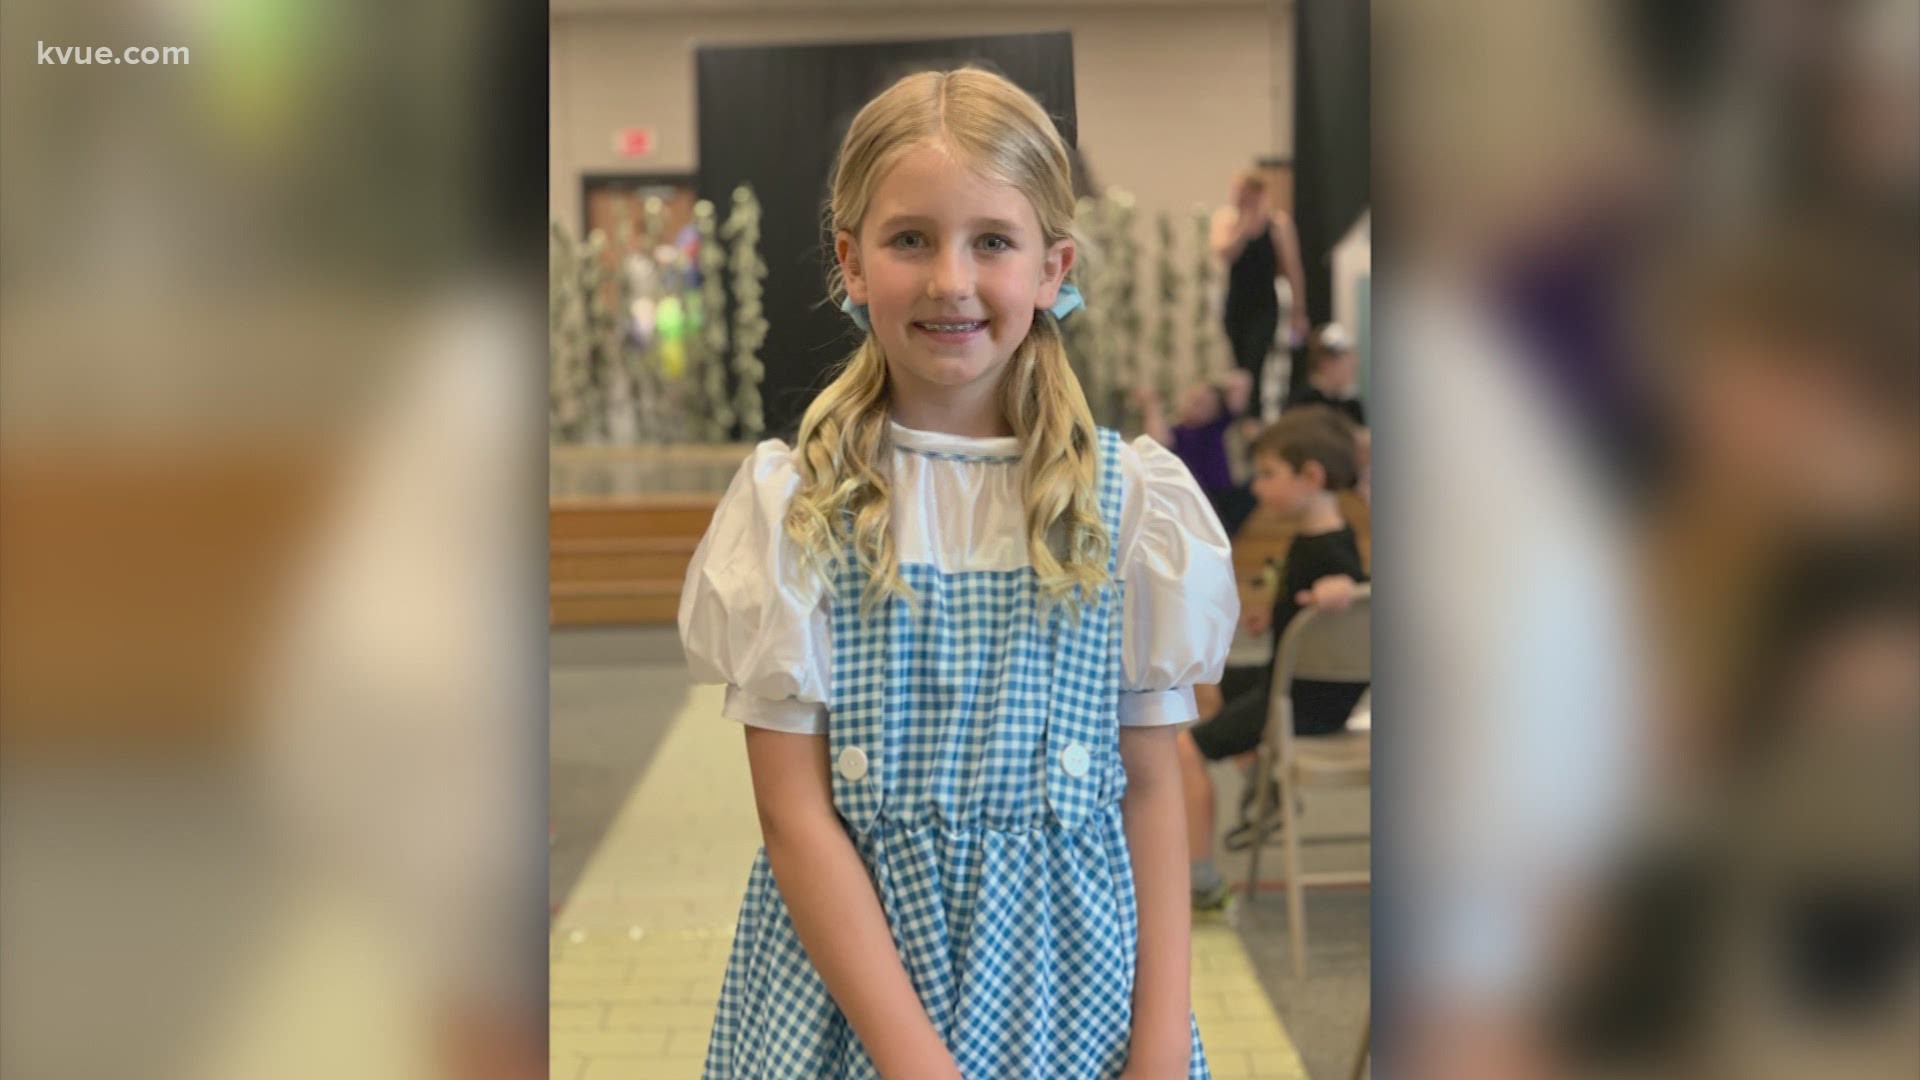 She organized a "pop-tab" collection at her school to benefit the Ronald McDonald House. She told KVUE they collected more than a million of the tabs!